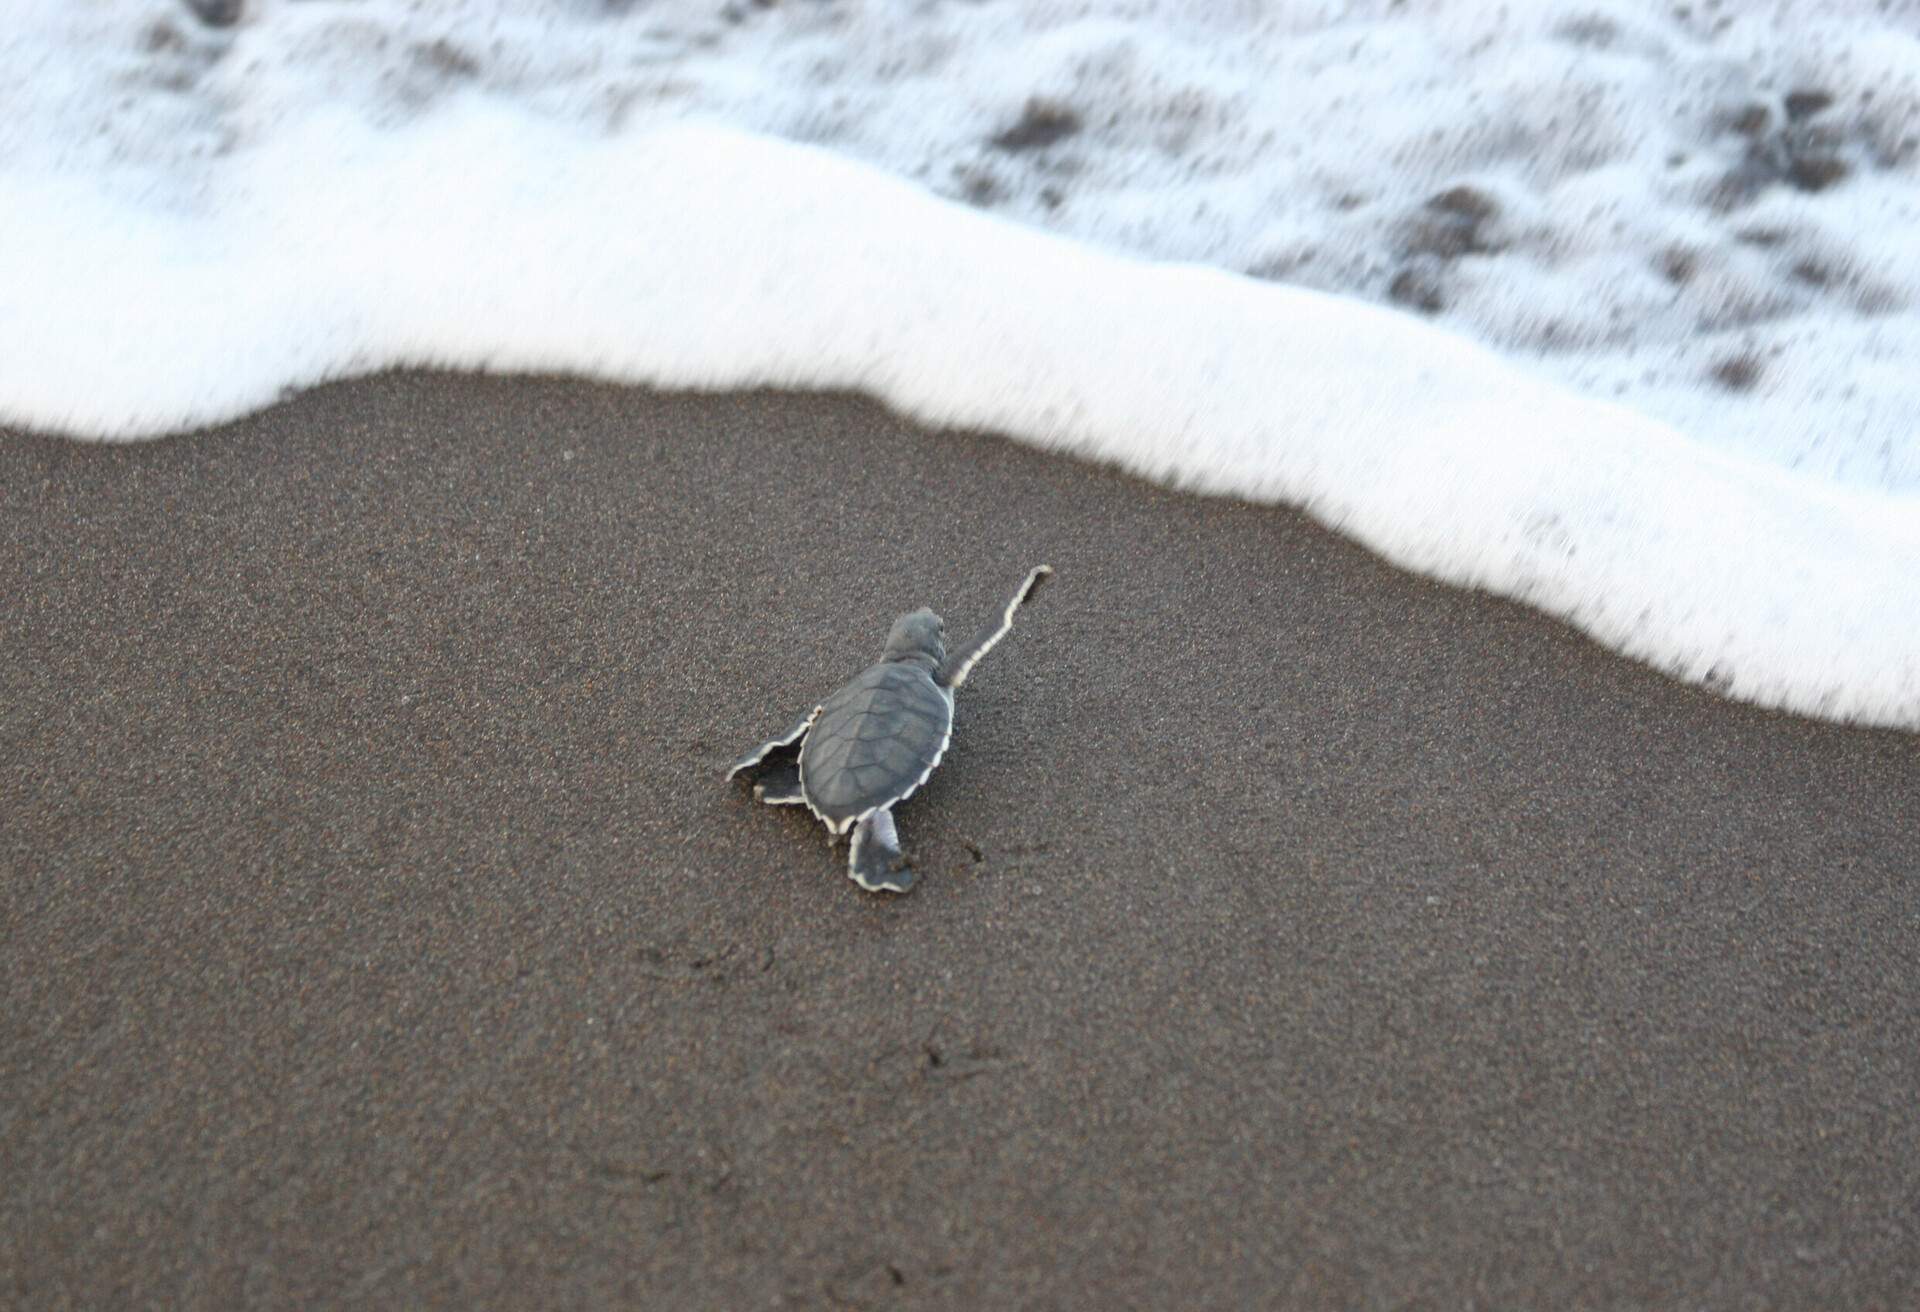 A newly hatched sea turtle of the caretta caretta species has just crossed the beach and is about to take its first swim into the Caribbean Sea.